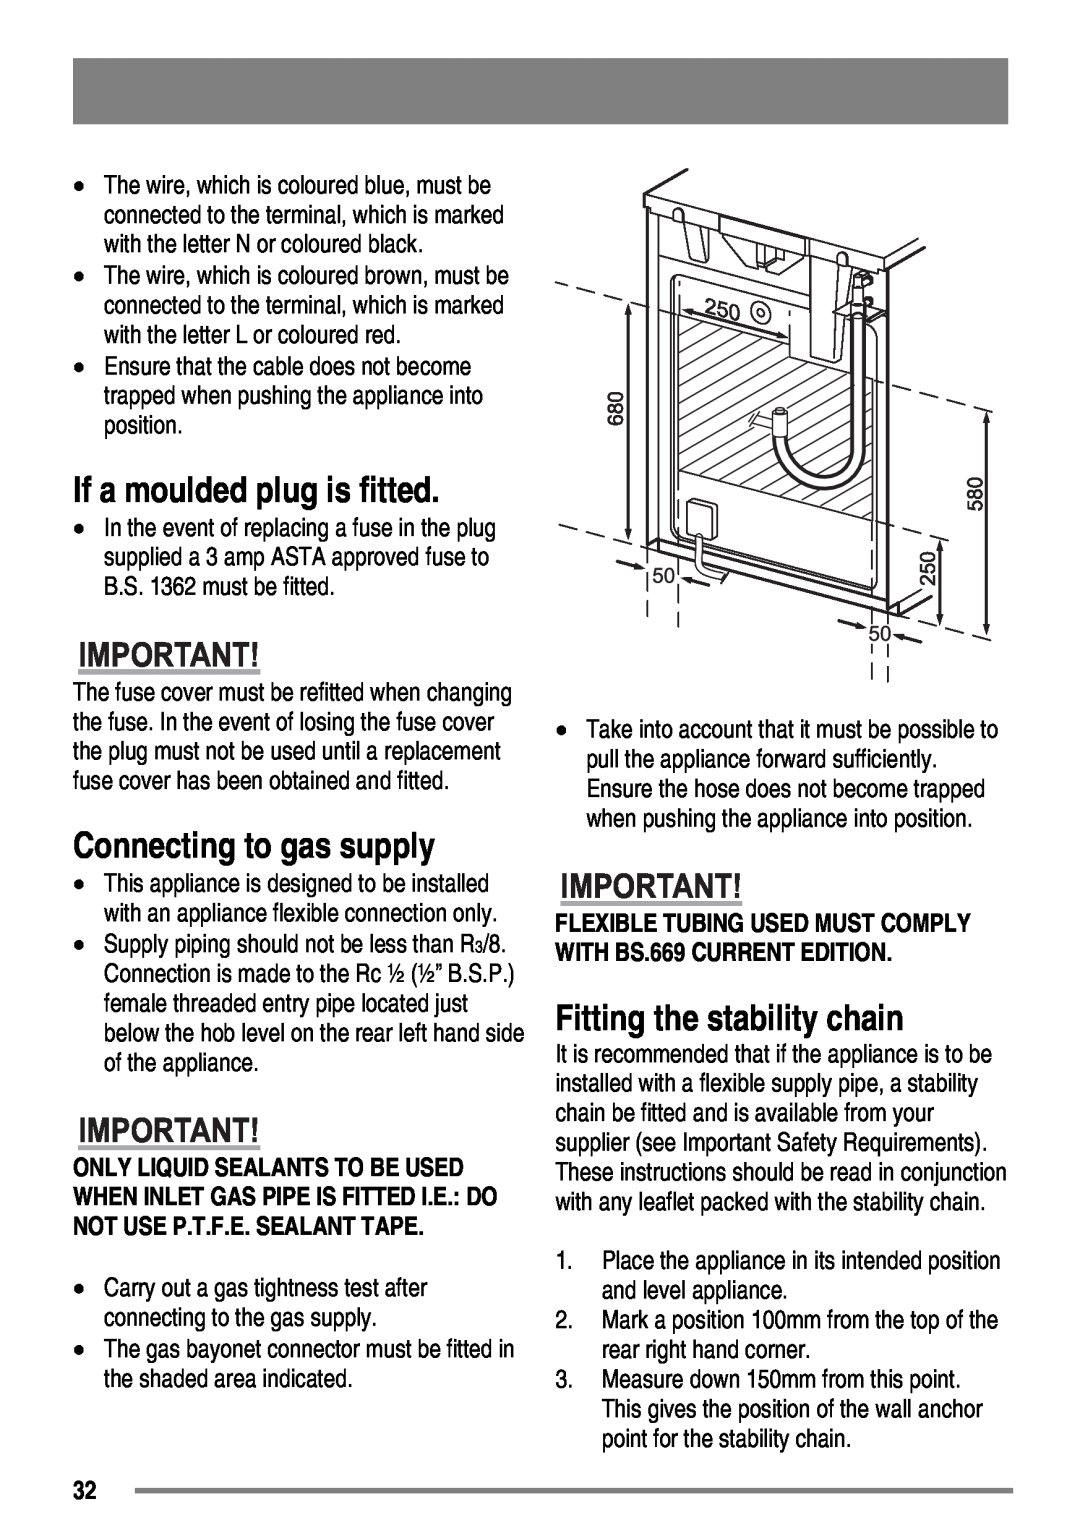 Zanussi ZKG6010 user manual If a moulded plug is fitted, Connecting to gas supply, Fitting the stability chain 